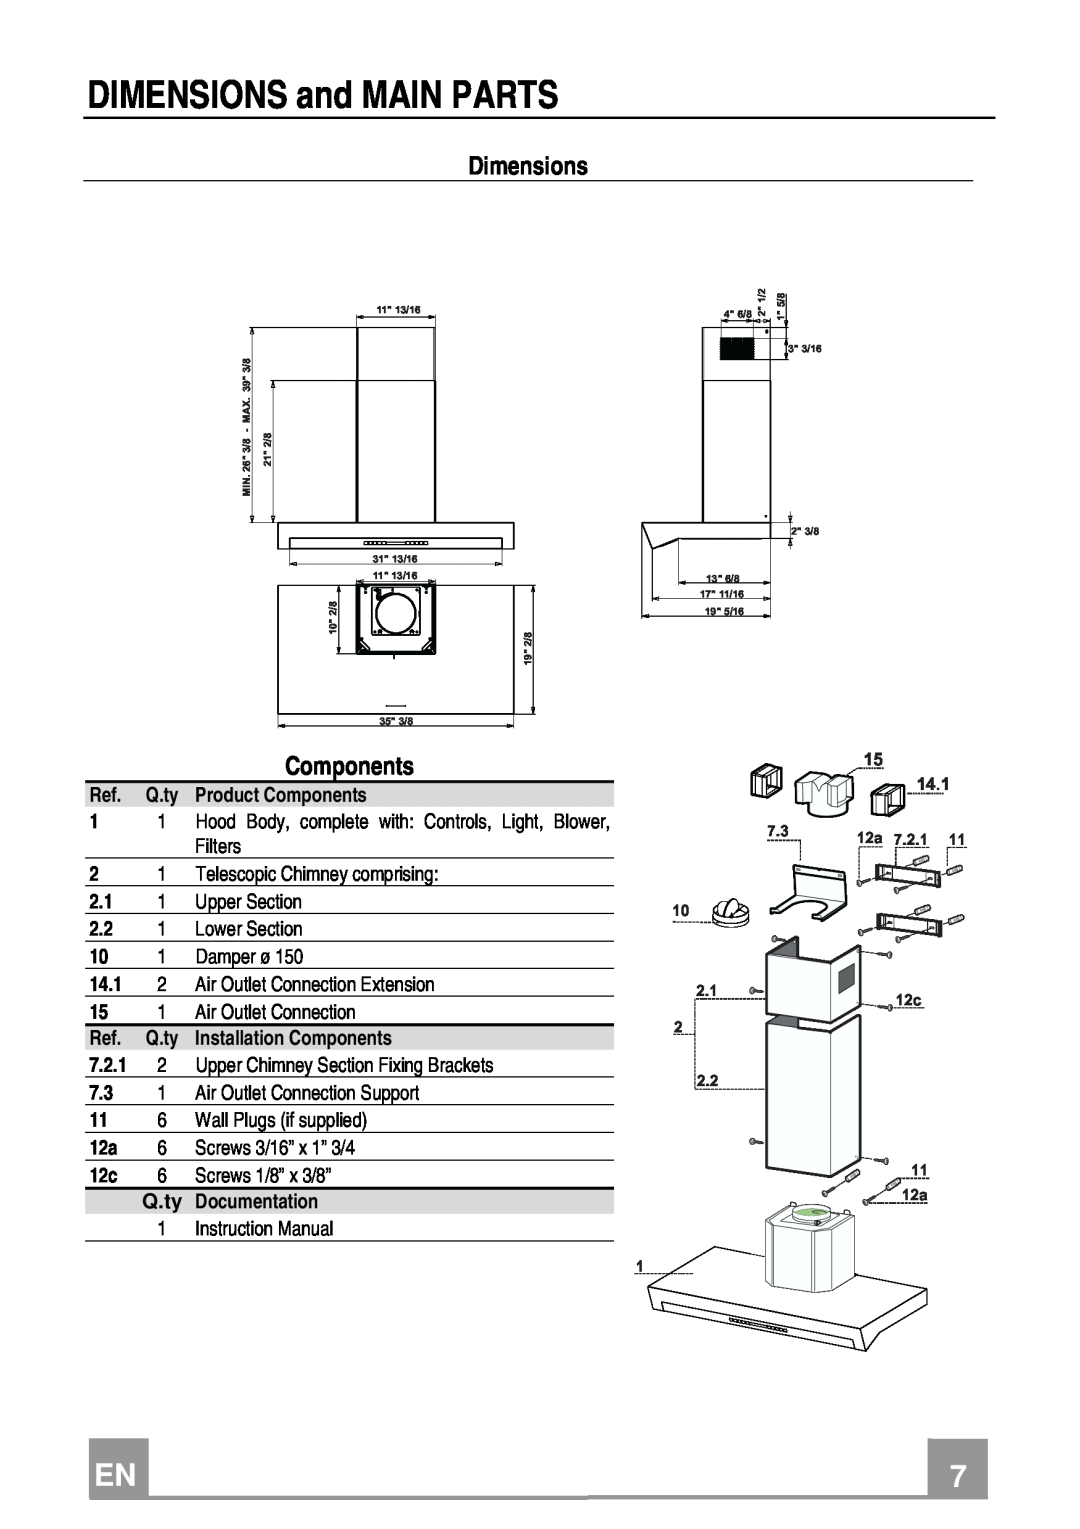 Franke Consumer Products FNE 368 TC W installation instructions DIMENSIONS and MAIN PARTS, Dimensions, Components 